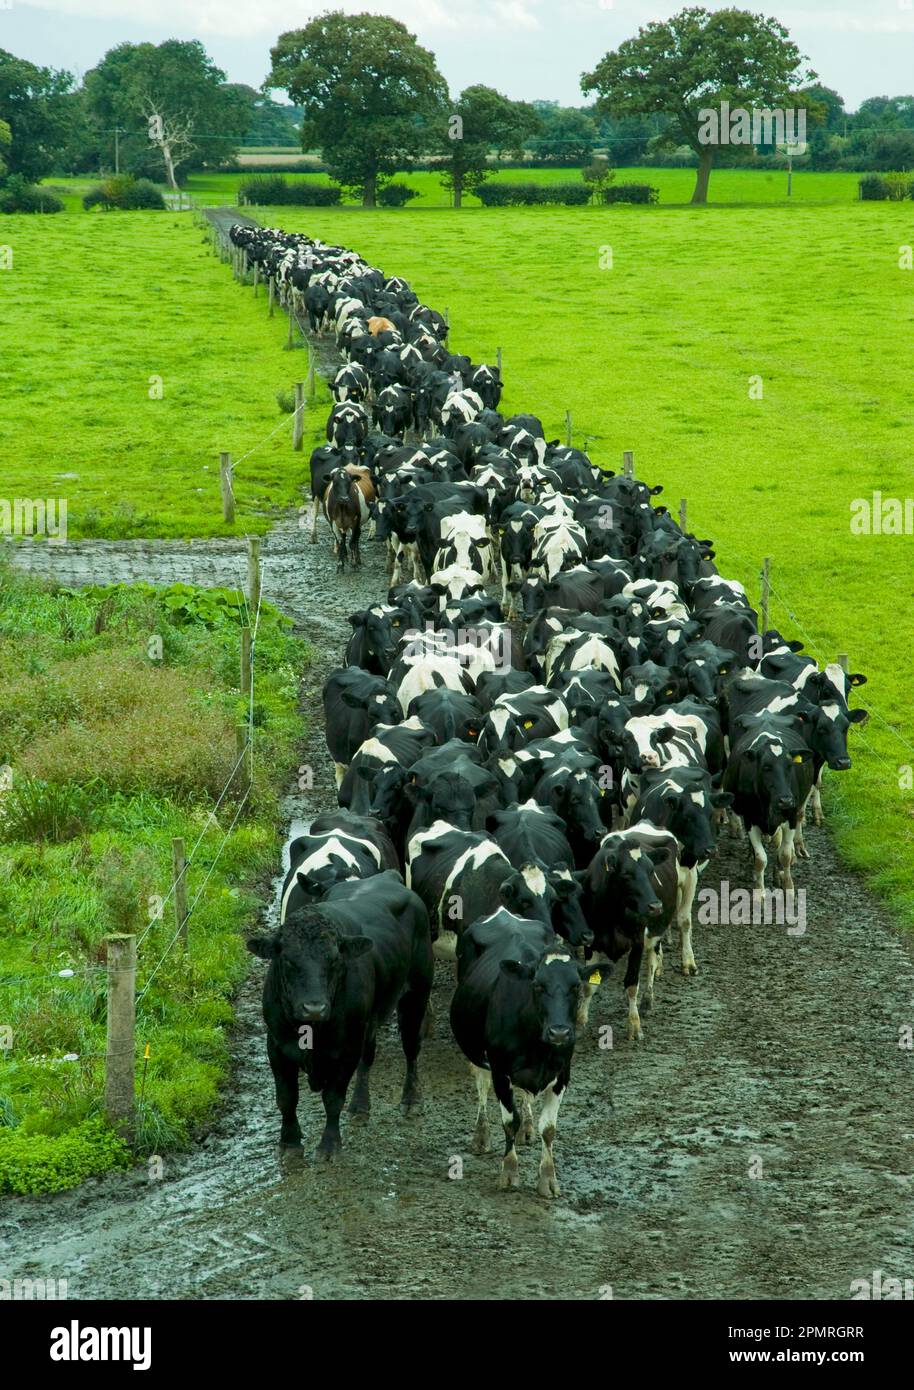 Domestic cattle, Holstein Friesian, cows coming in for milking, walking on muddy paths, England, Great Britain Stock Photo